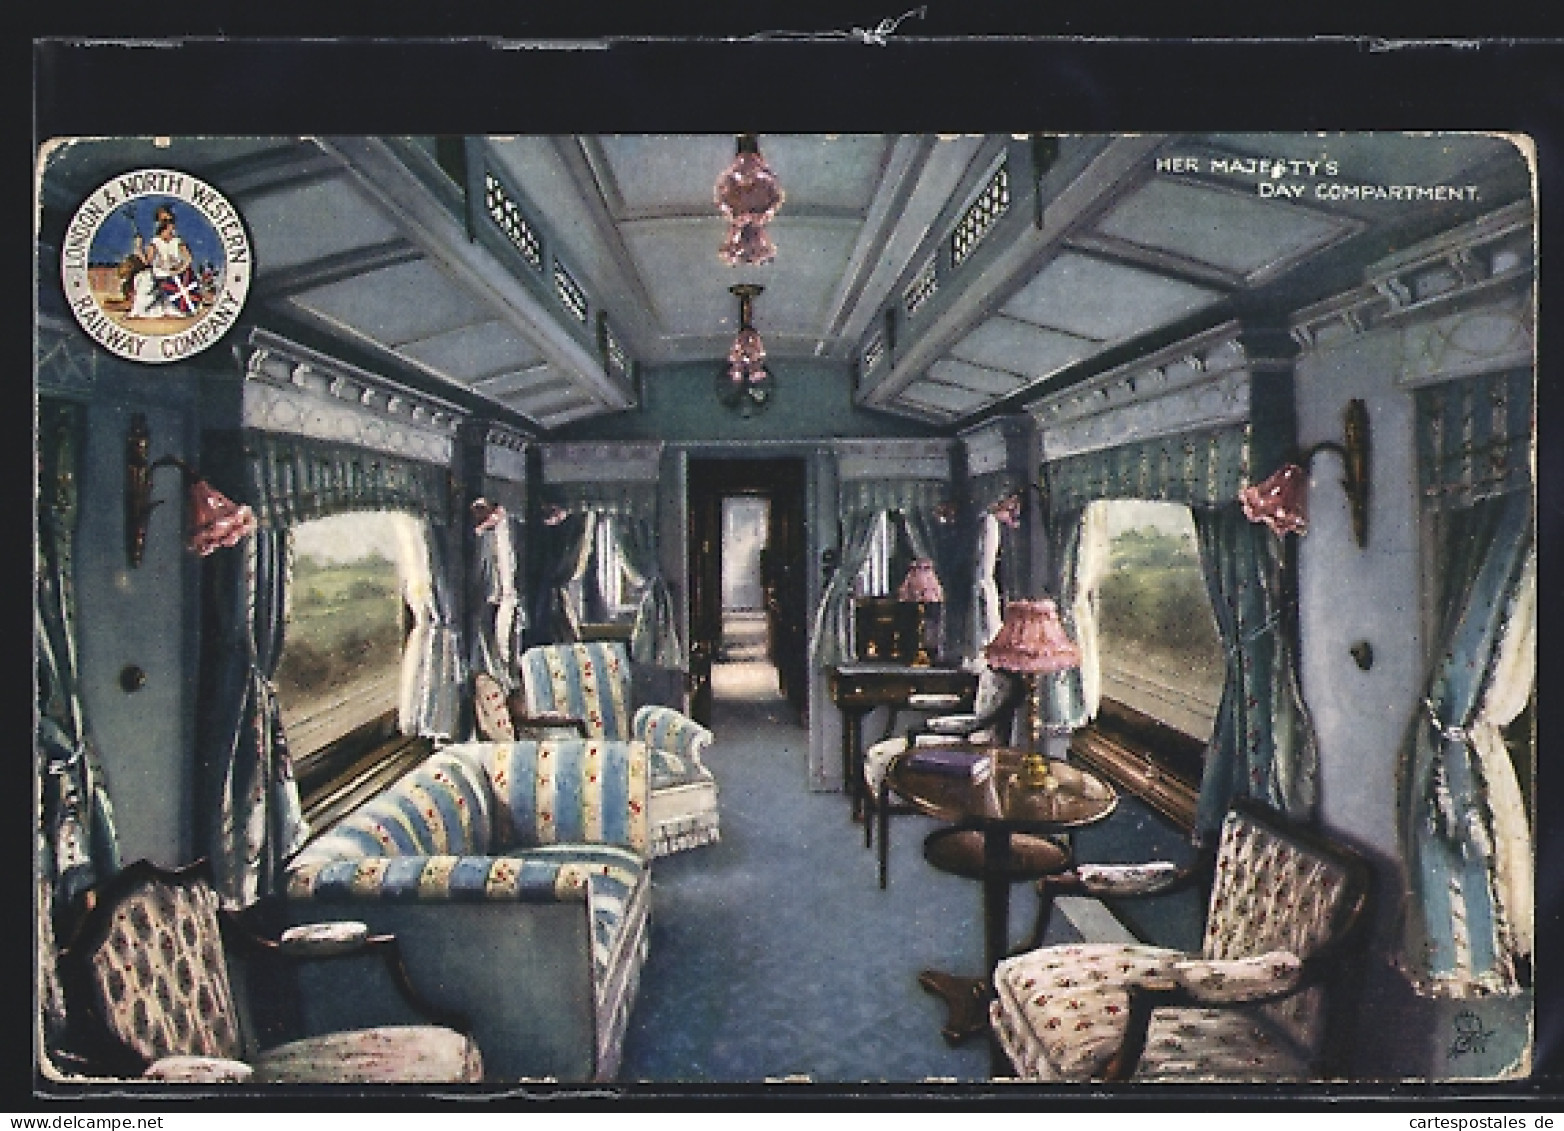 Pc London & North Western Railway Company, Her Majesty`s Day Compartment, Englische Eisenbahn  - Trains